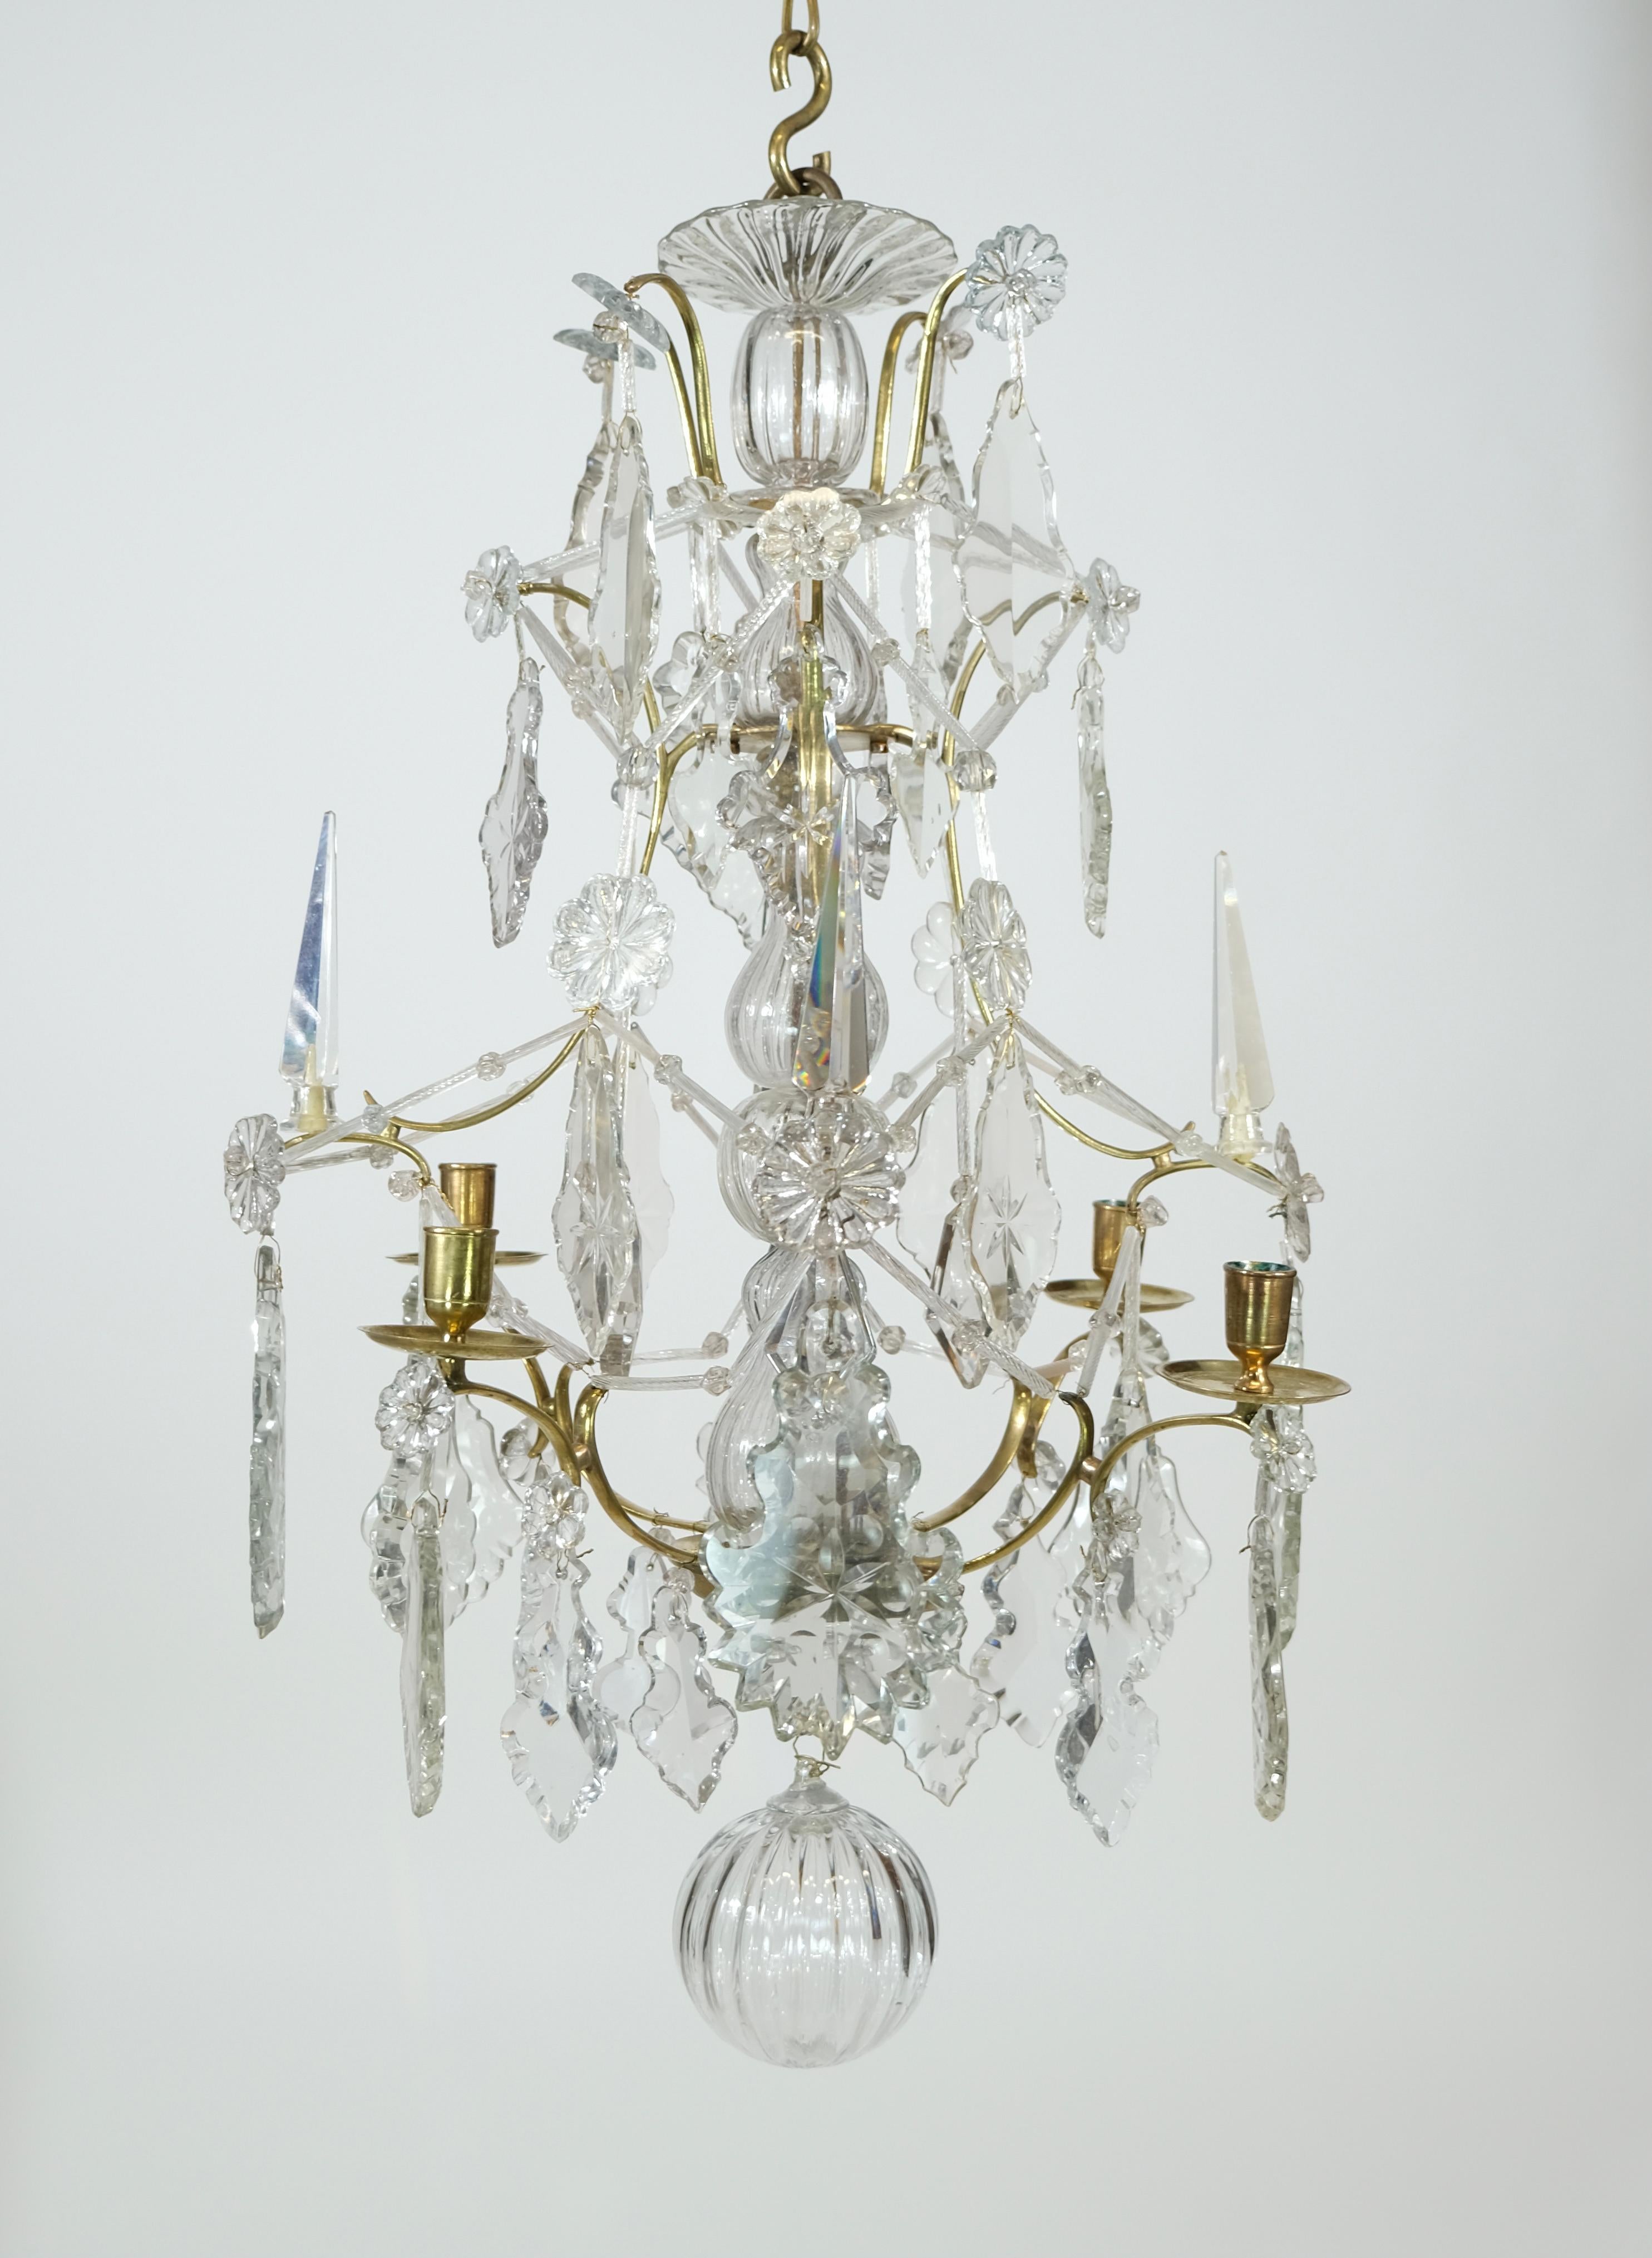 A small Swedish Rococo brass and cut-glass four-light chandelier, 18th century.
The brass cage hung with cut-glass leaf-shaped pendants and other shapes. The center stem dressed with blown glass pieces ending below with a blown glass bowl.
The